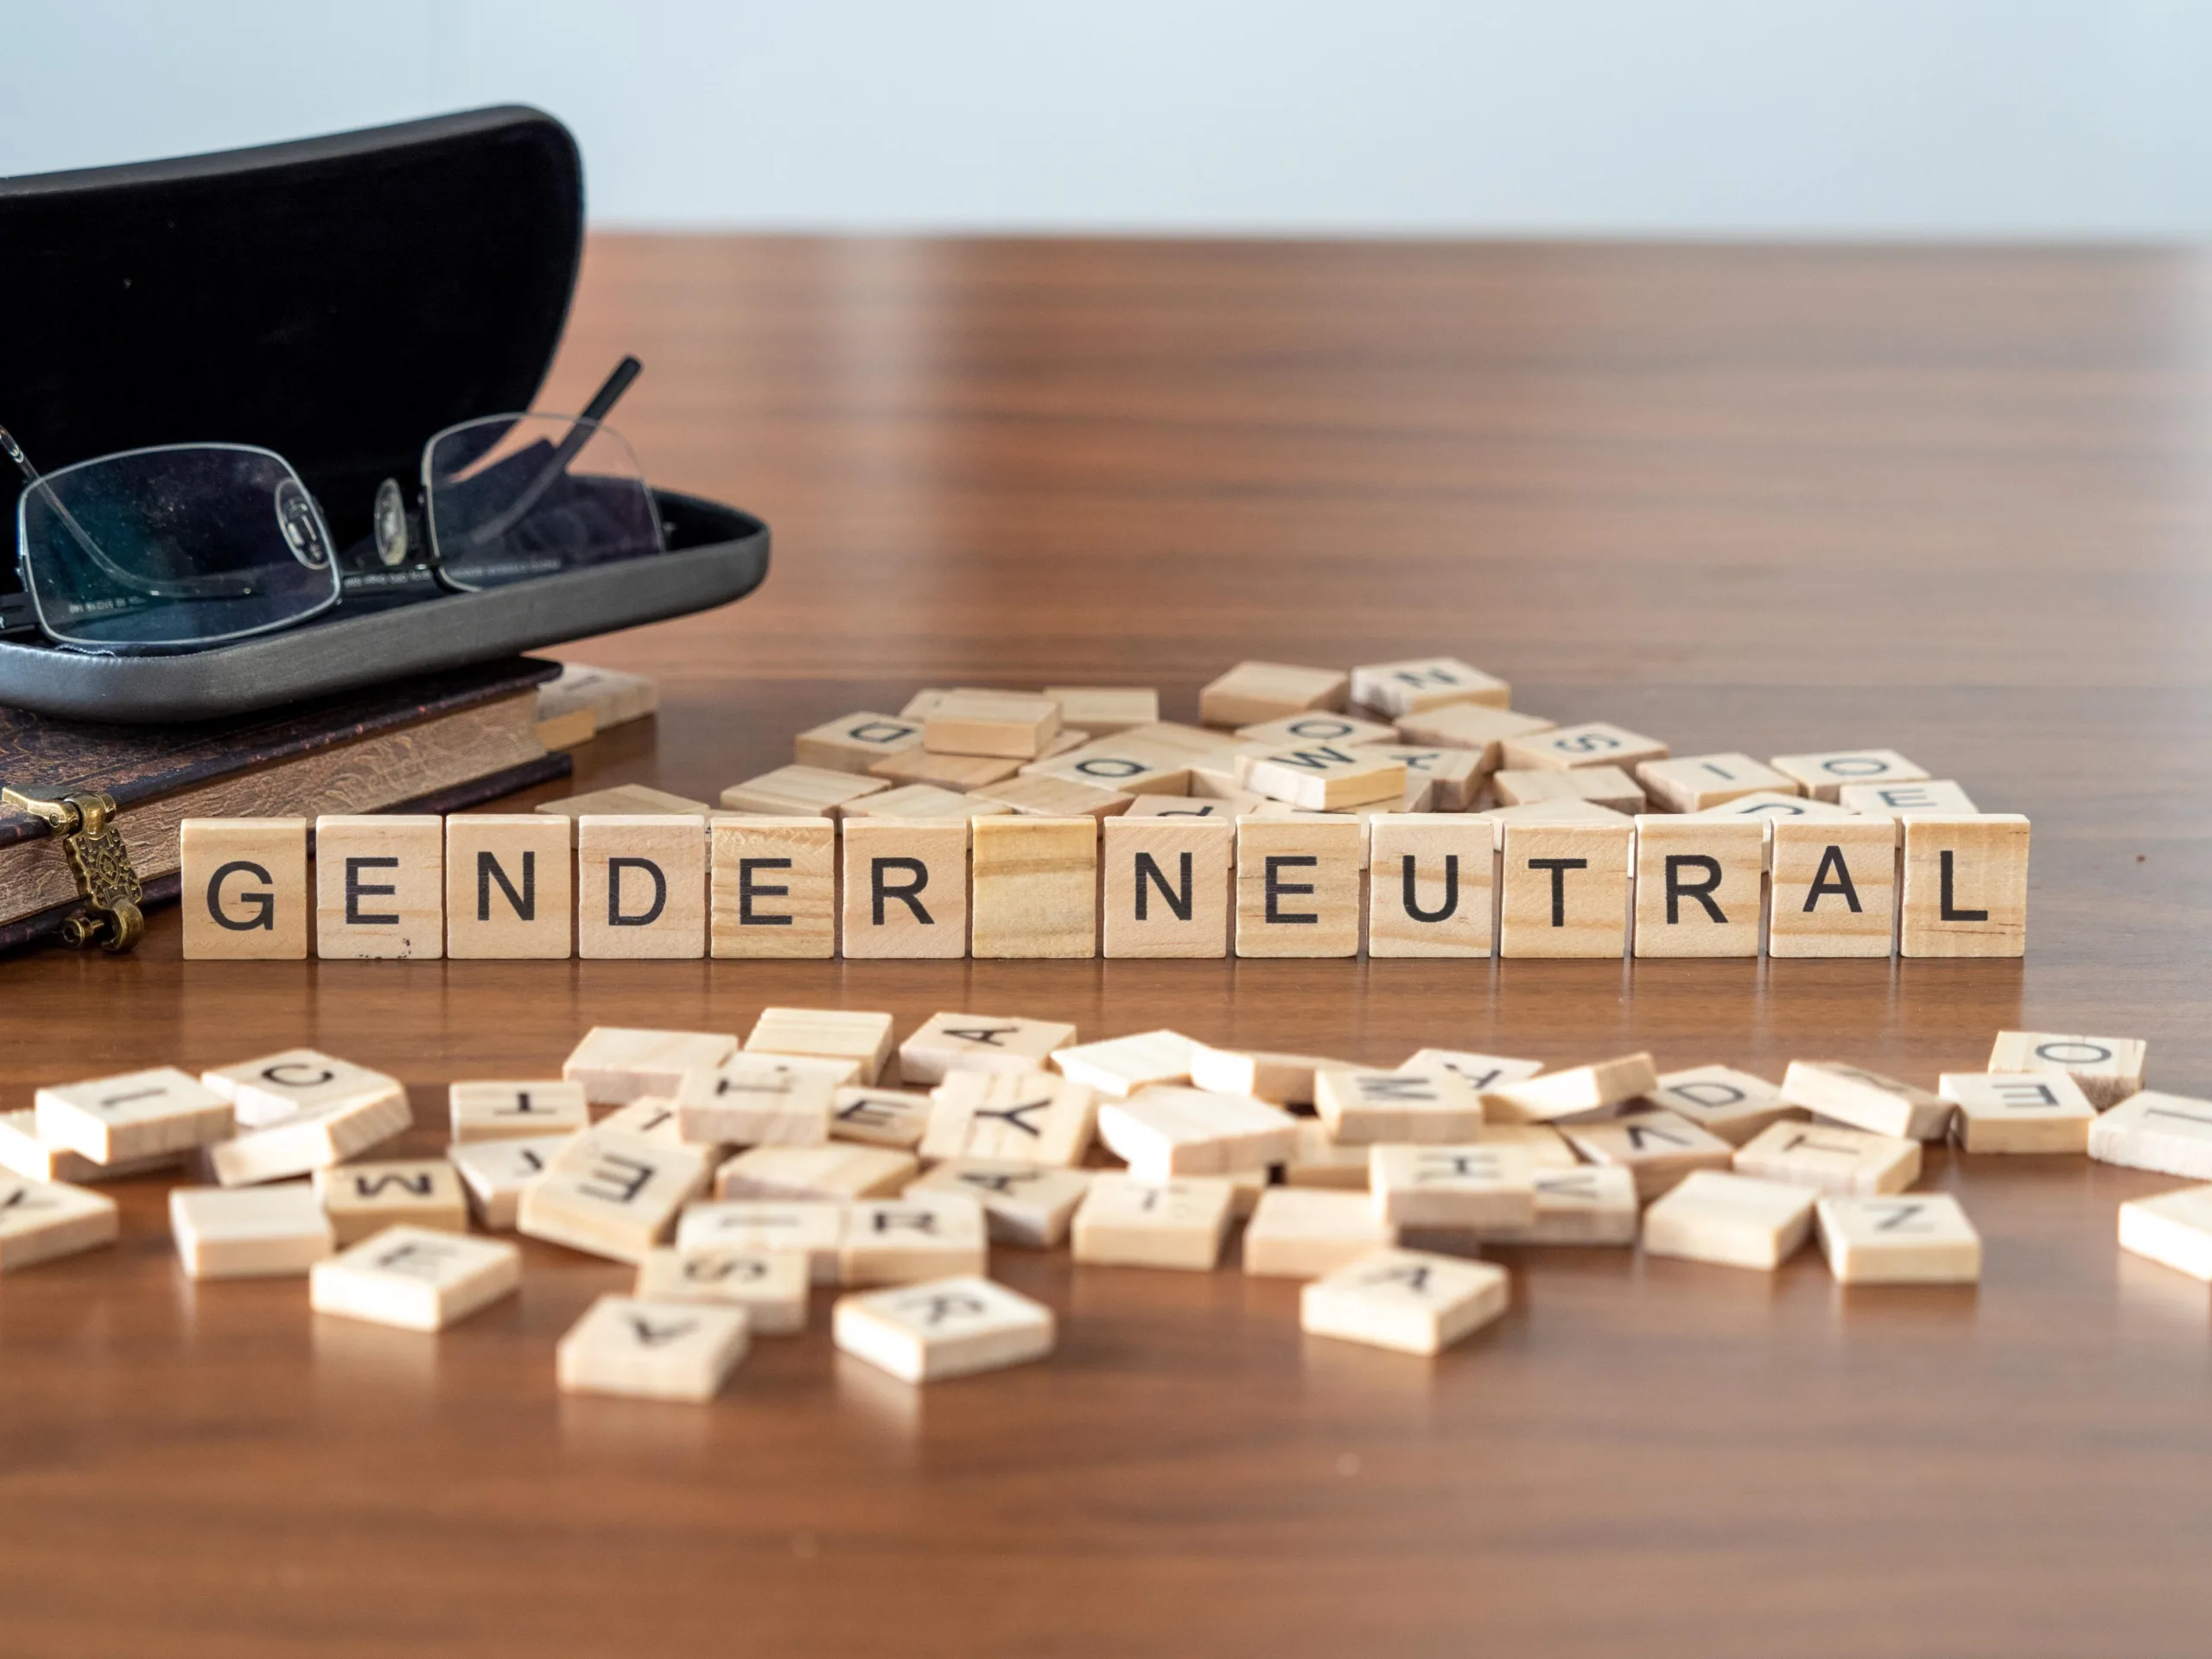 Gender,Neutral,The,Word,Or,Concept,Represented,By,Wooden,Letter